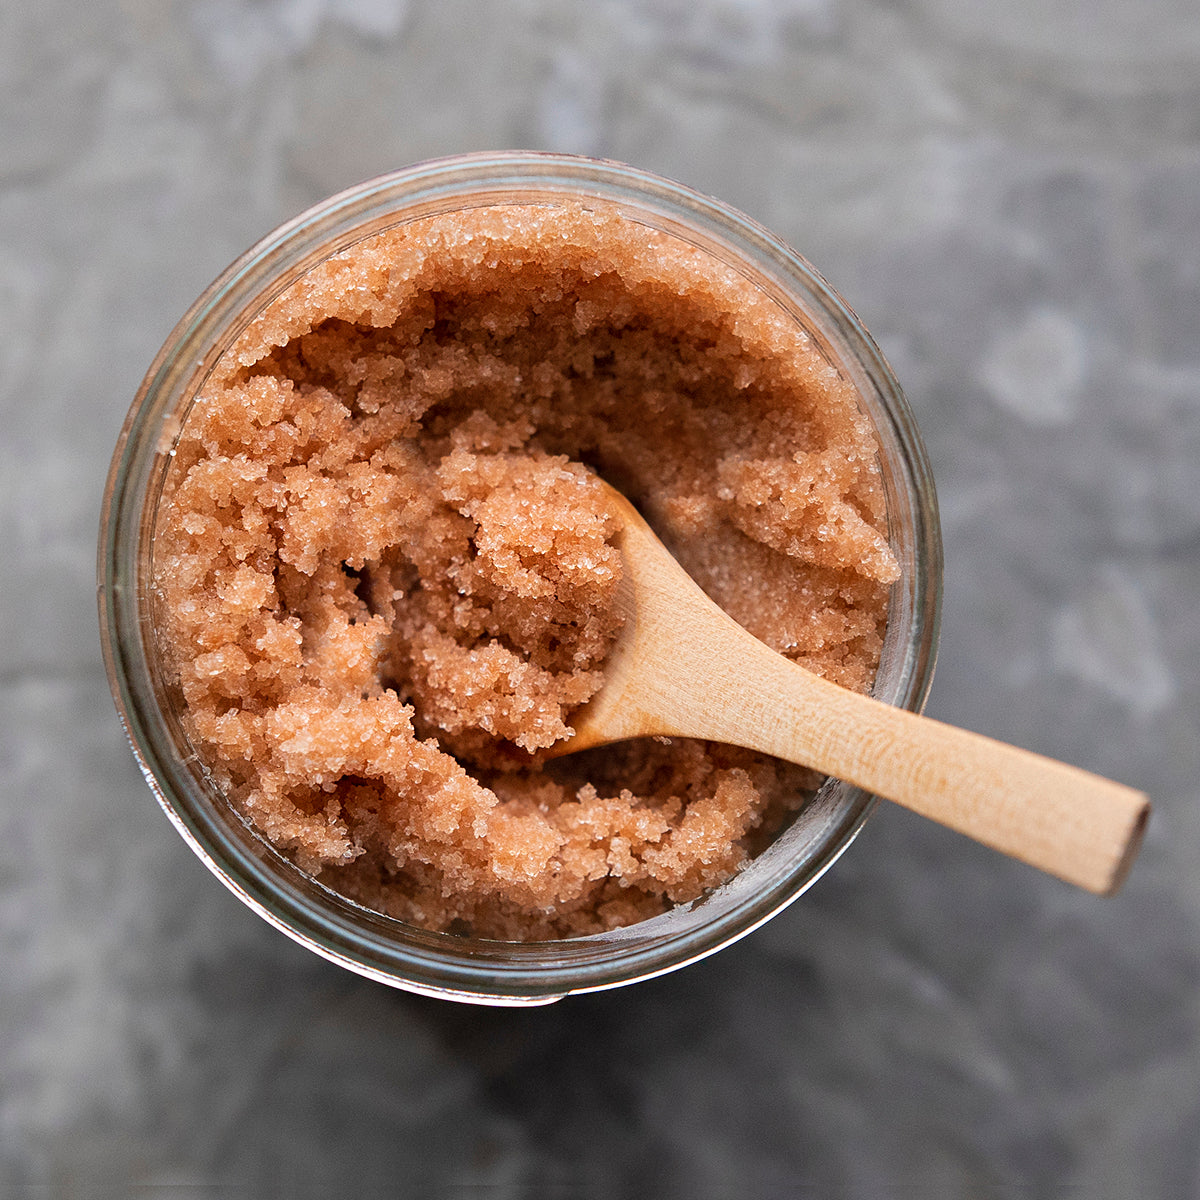 Top-down view of an open jar of 360 Botanics Sugar Scrub, showcasing the granular texture of the natural brown sugar blend. A wooden spoon is nestled in the scrub for application, set against a marble grey background, emphasizing the product's organic and luxurious essence